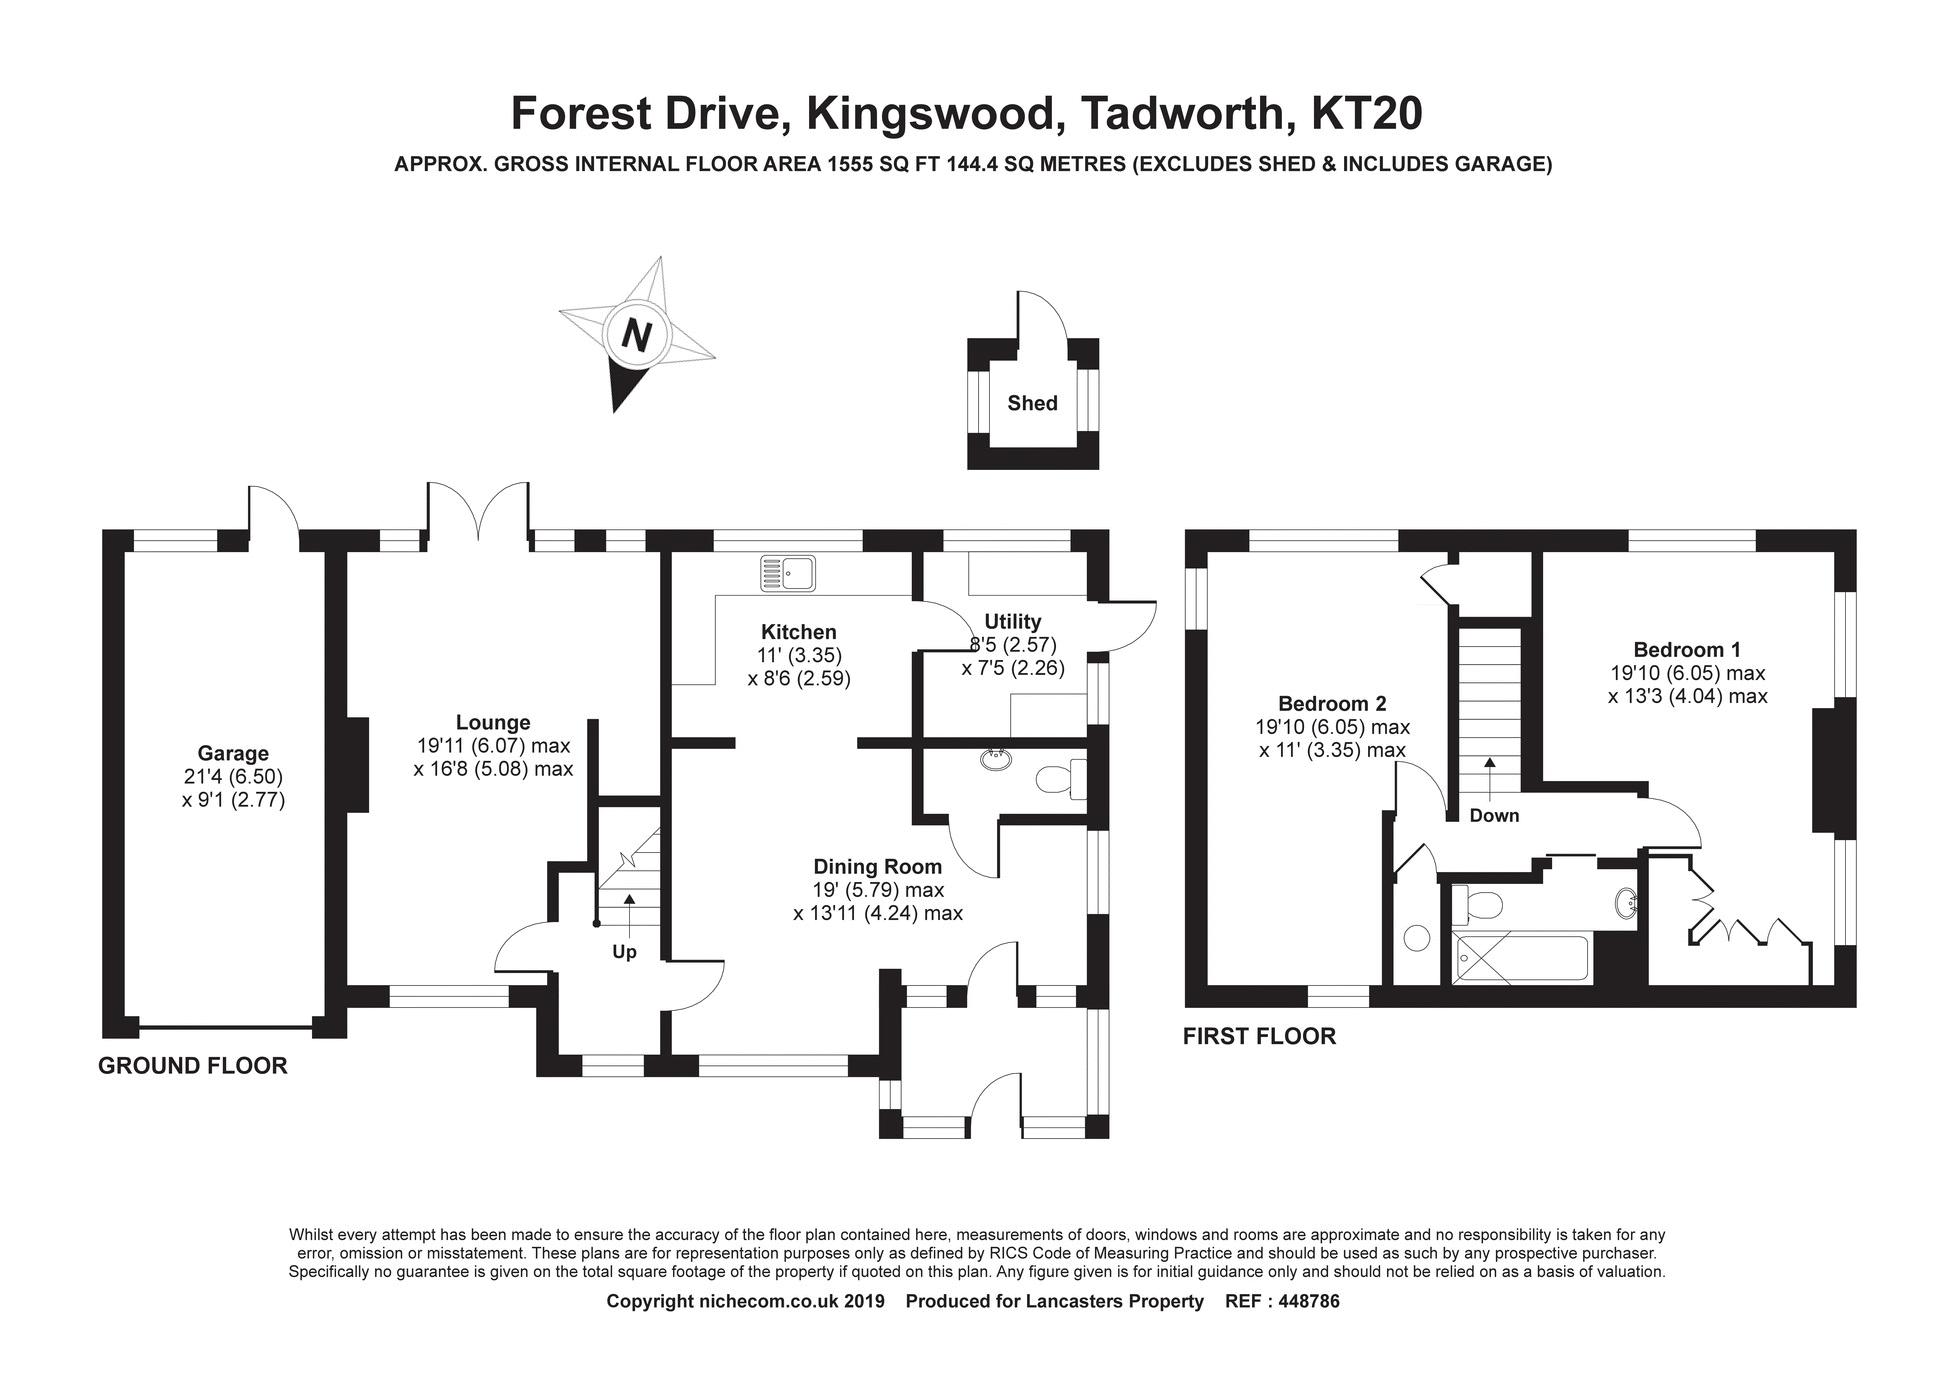 2 Bedrooms Detached house for sale in Forest Drive, Kingswood, Tadworth KT20